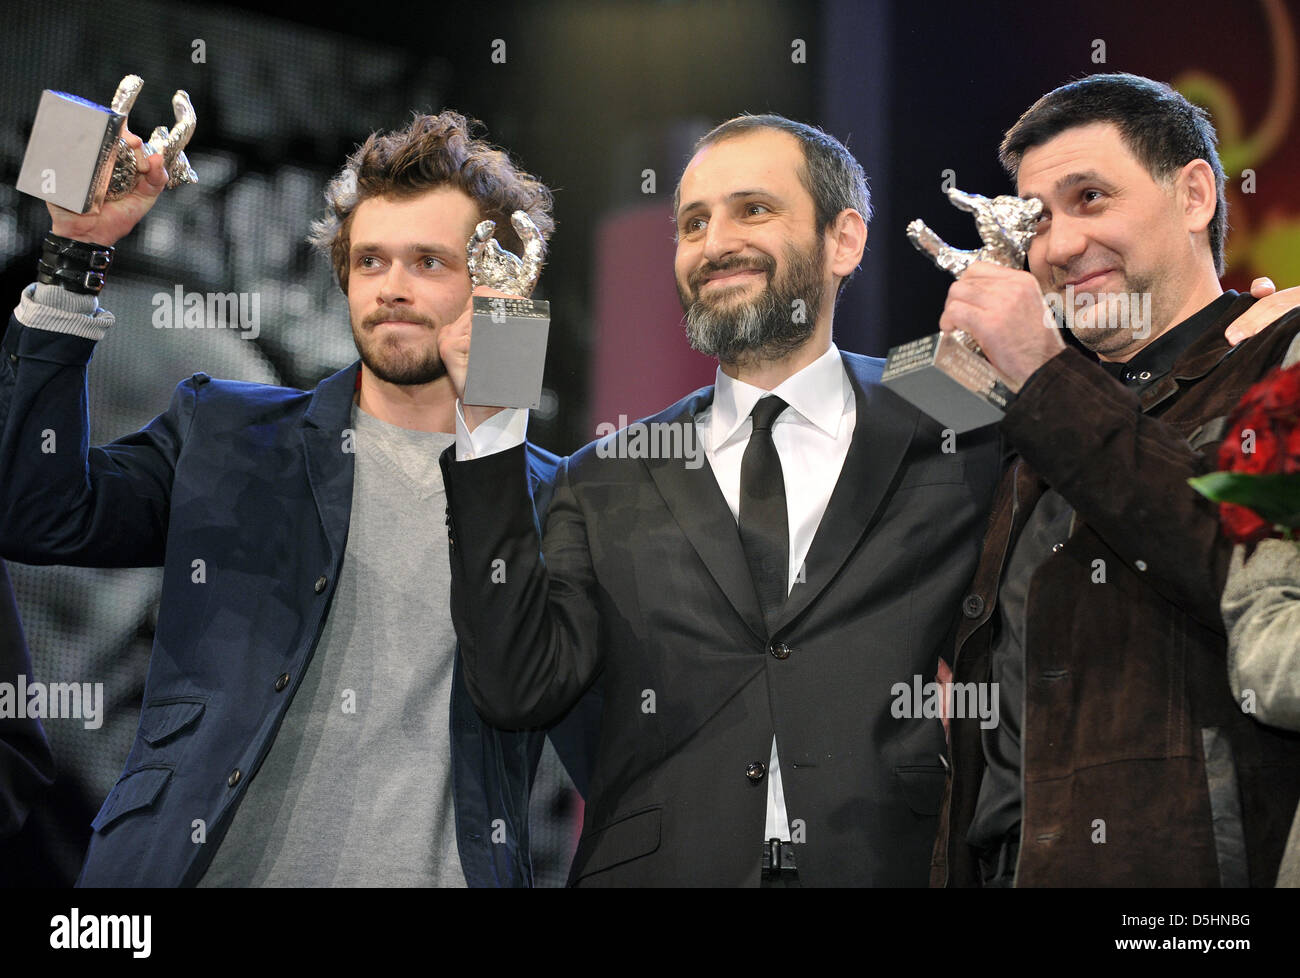 Russian actors Grigory Dobrygin (L) and Sergei Puskepalis (R) hold the Award for Best Actor (Silver Bear) for the movie 'How I Ended This Summer' while Russian director Alexei Popogrebsky holds the Silver Bear for Outstanding Artistic Achievement in the Category Camera for Pavel Kostomarov during the award ceremony of the 60th Berlinale International Film Festival in Berlin, German Stock Photo